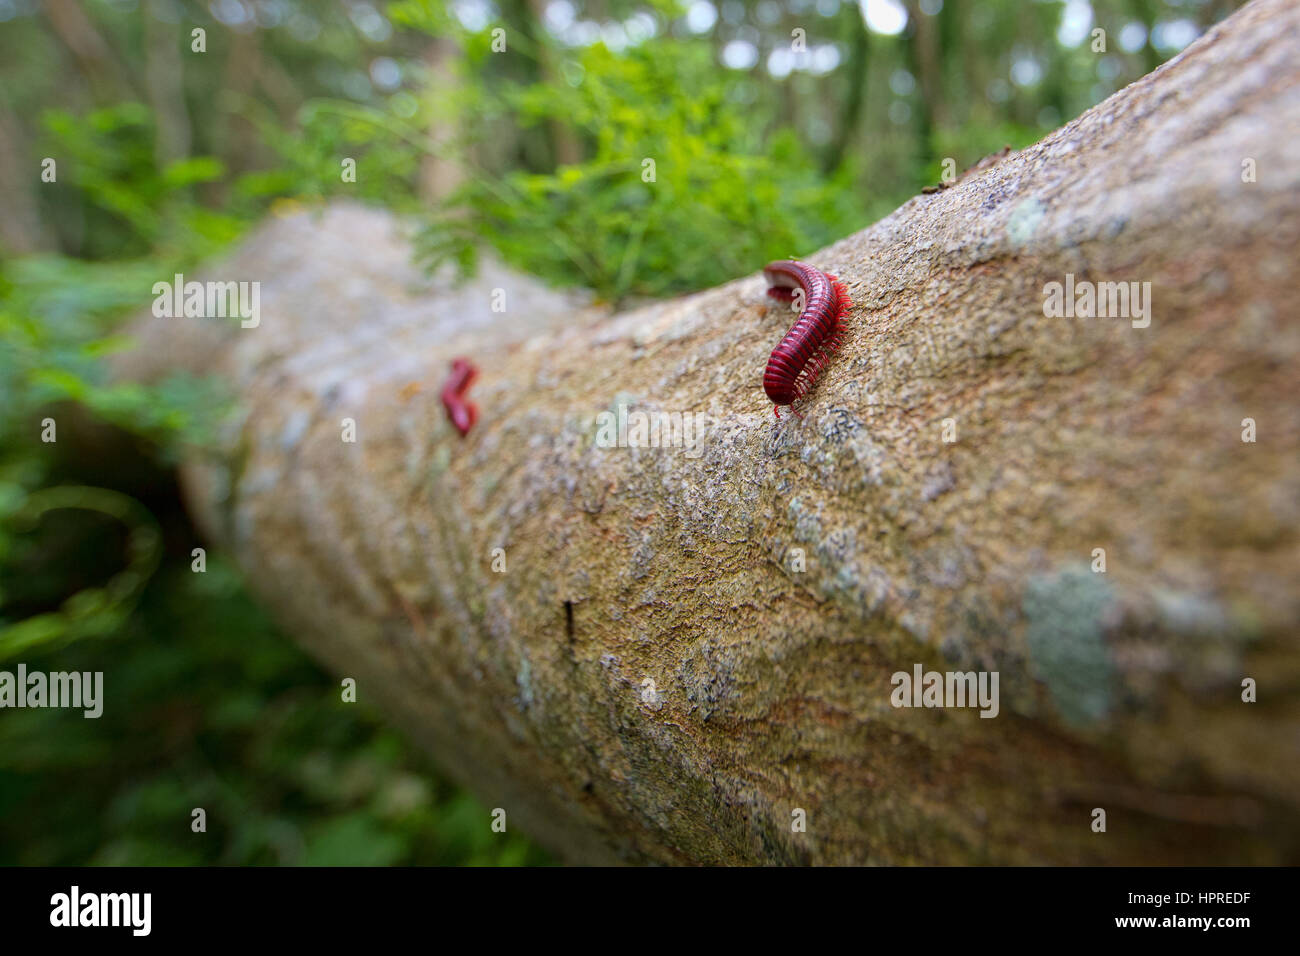 Red millipedes, centrobolus fulgidus, explore a fallen acacia karroo tree in search of food in the coastal forests around Richards Bay, South Africa. Stock Photo